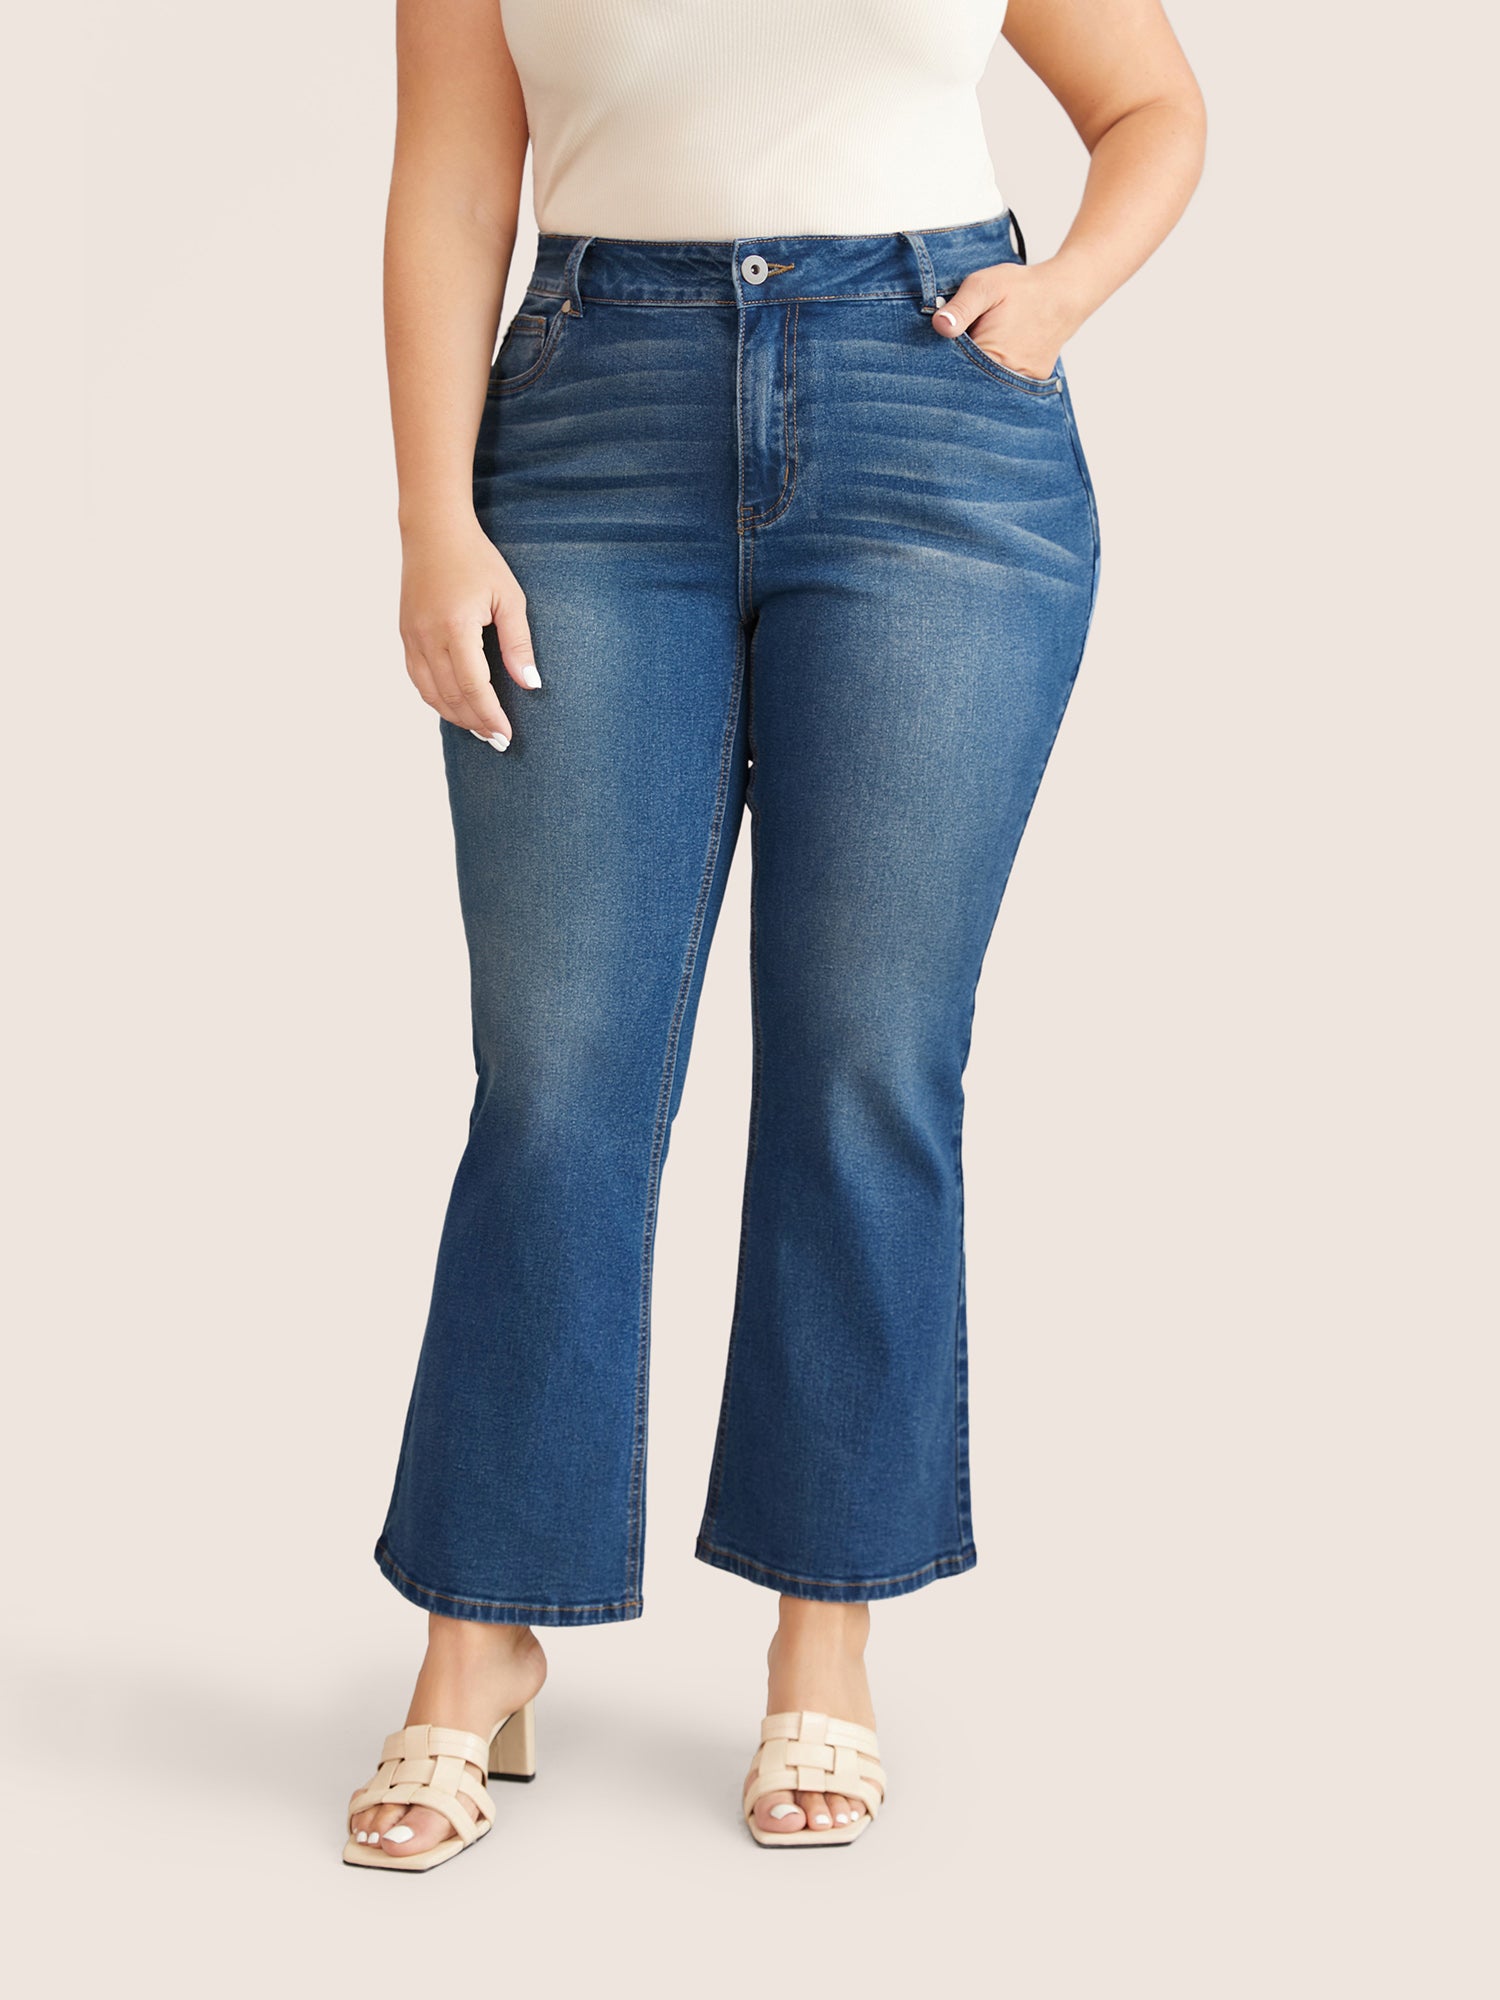 

Plus Size Women Everyday Non High stretch Flare Leg Medium Wash Casual Jeans BloomChic, Blue